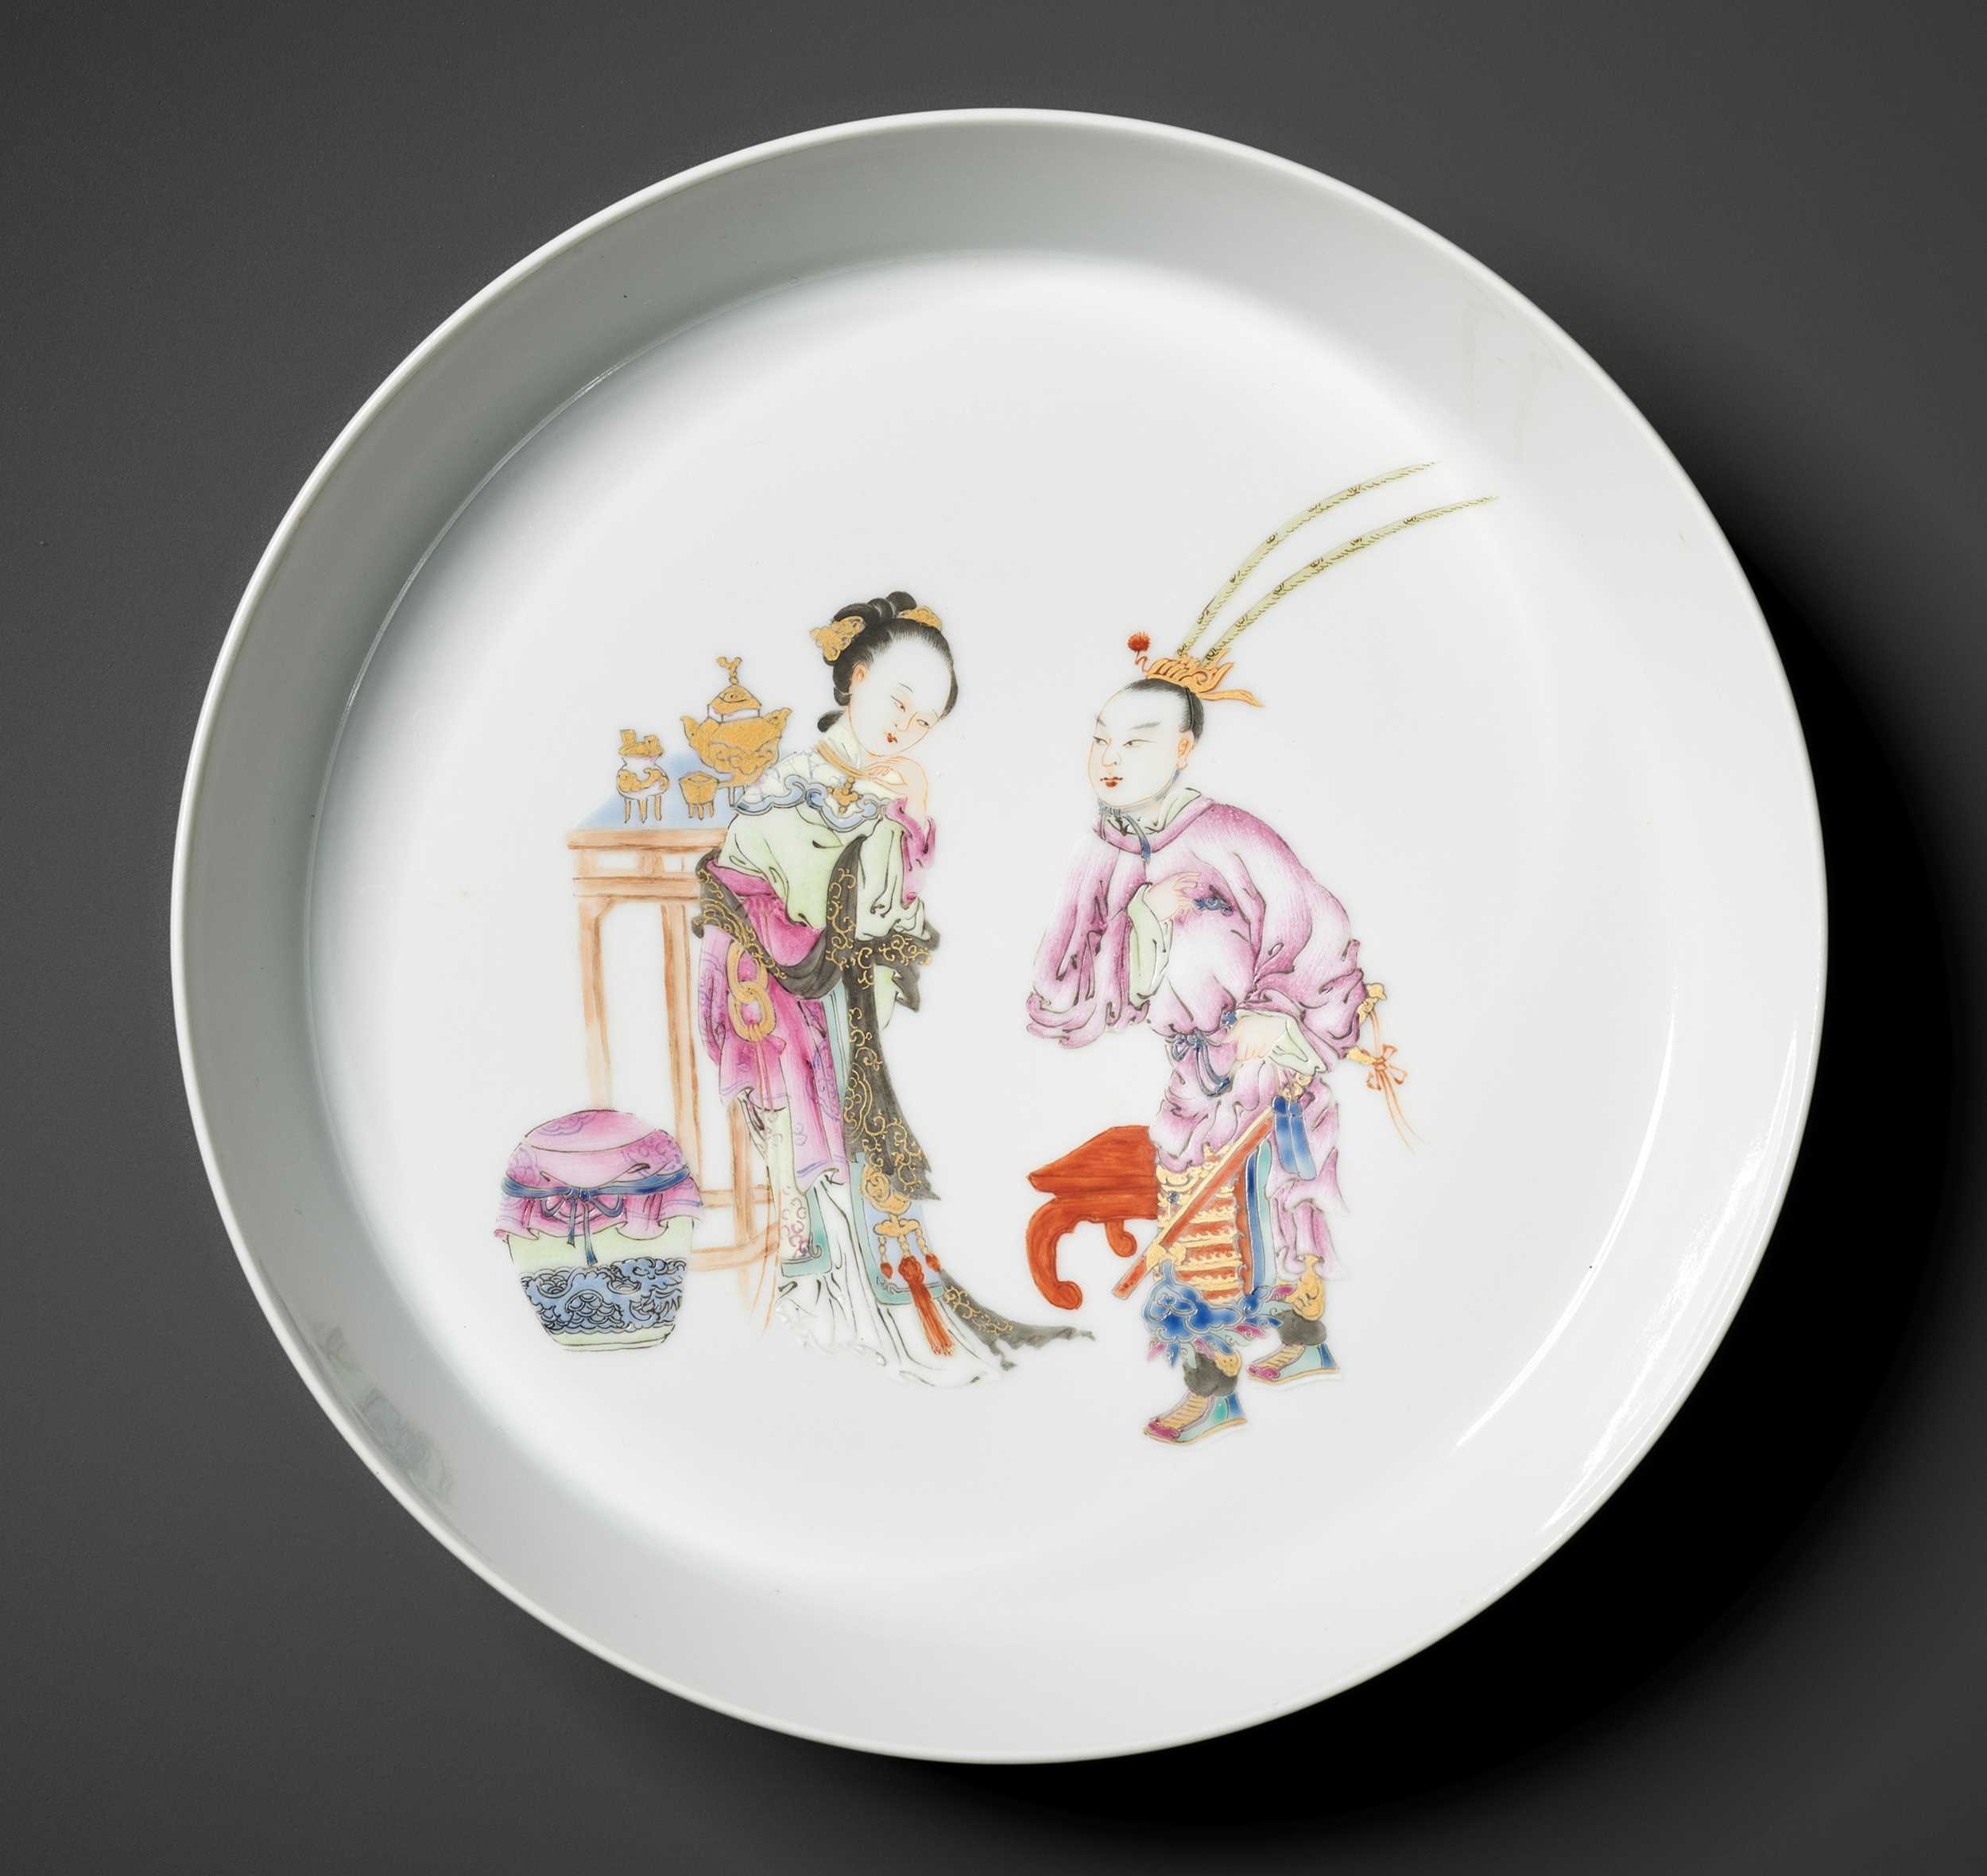 ROSE PORCELAIN DISH, LATE QING TO REPUBLIC PERIOD 清末民初粉彩人物場景盤...